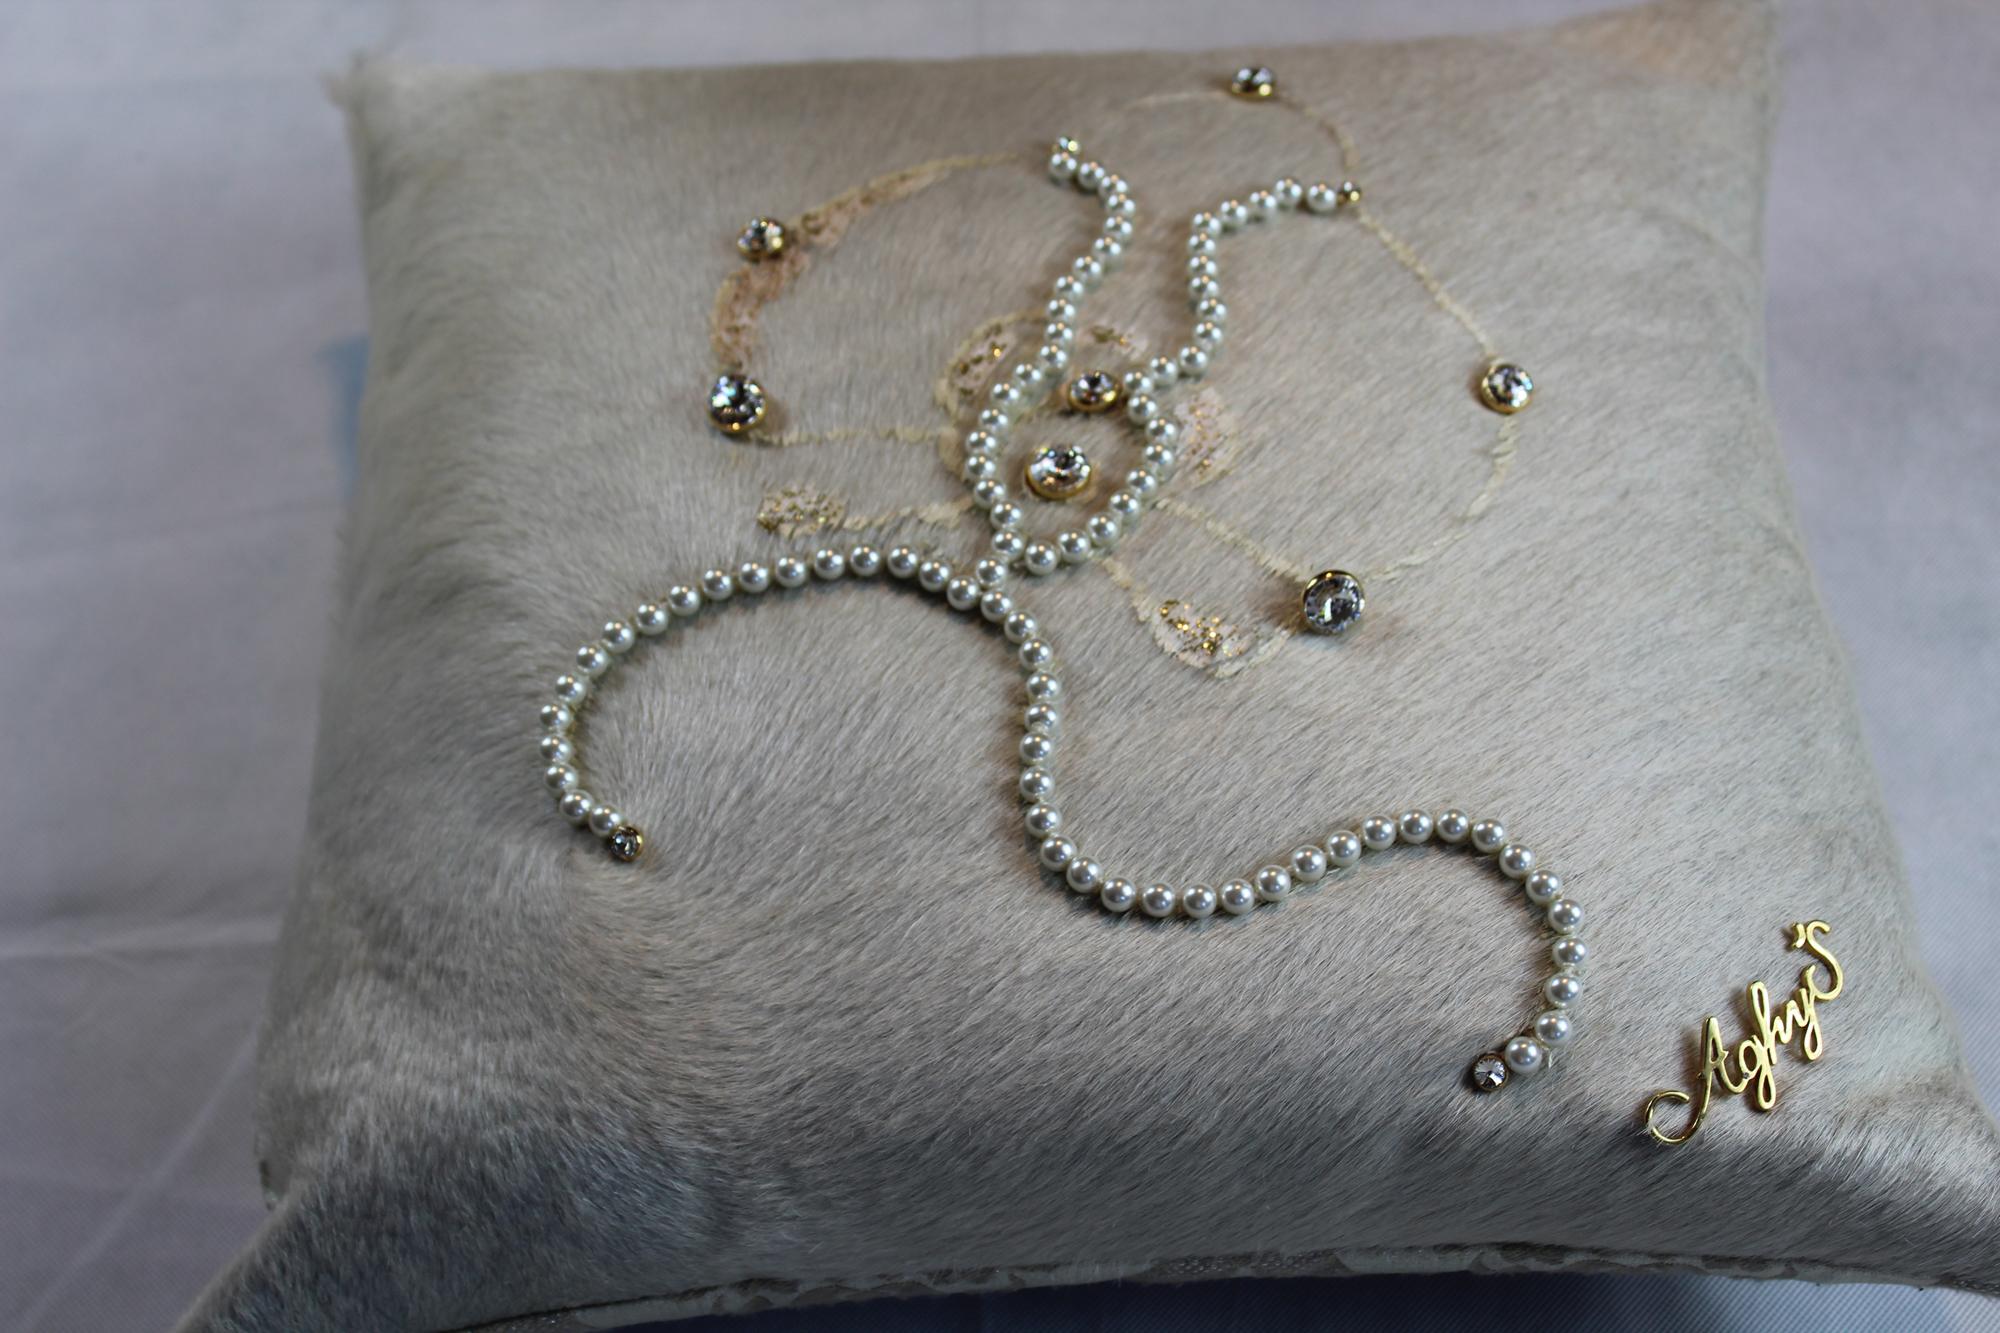 Cushion in white hand-painted cow leather front.

Insert of an hand painted Orchid ornament with white pearls and Svarowsky crystals. The back is in damask fabric gold and white.

Made in Italy
    